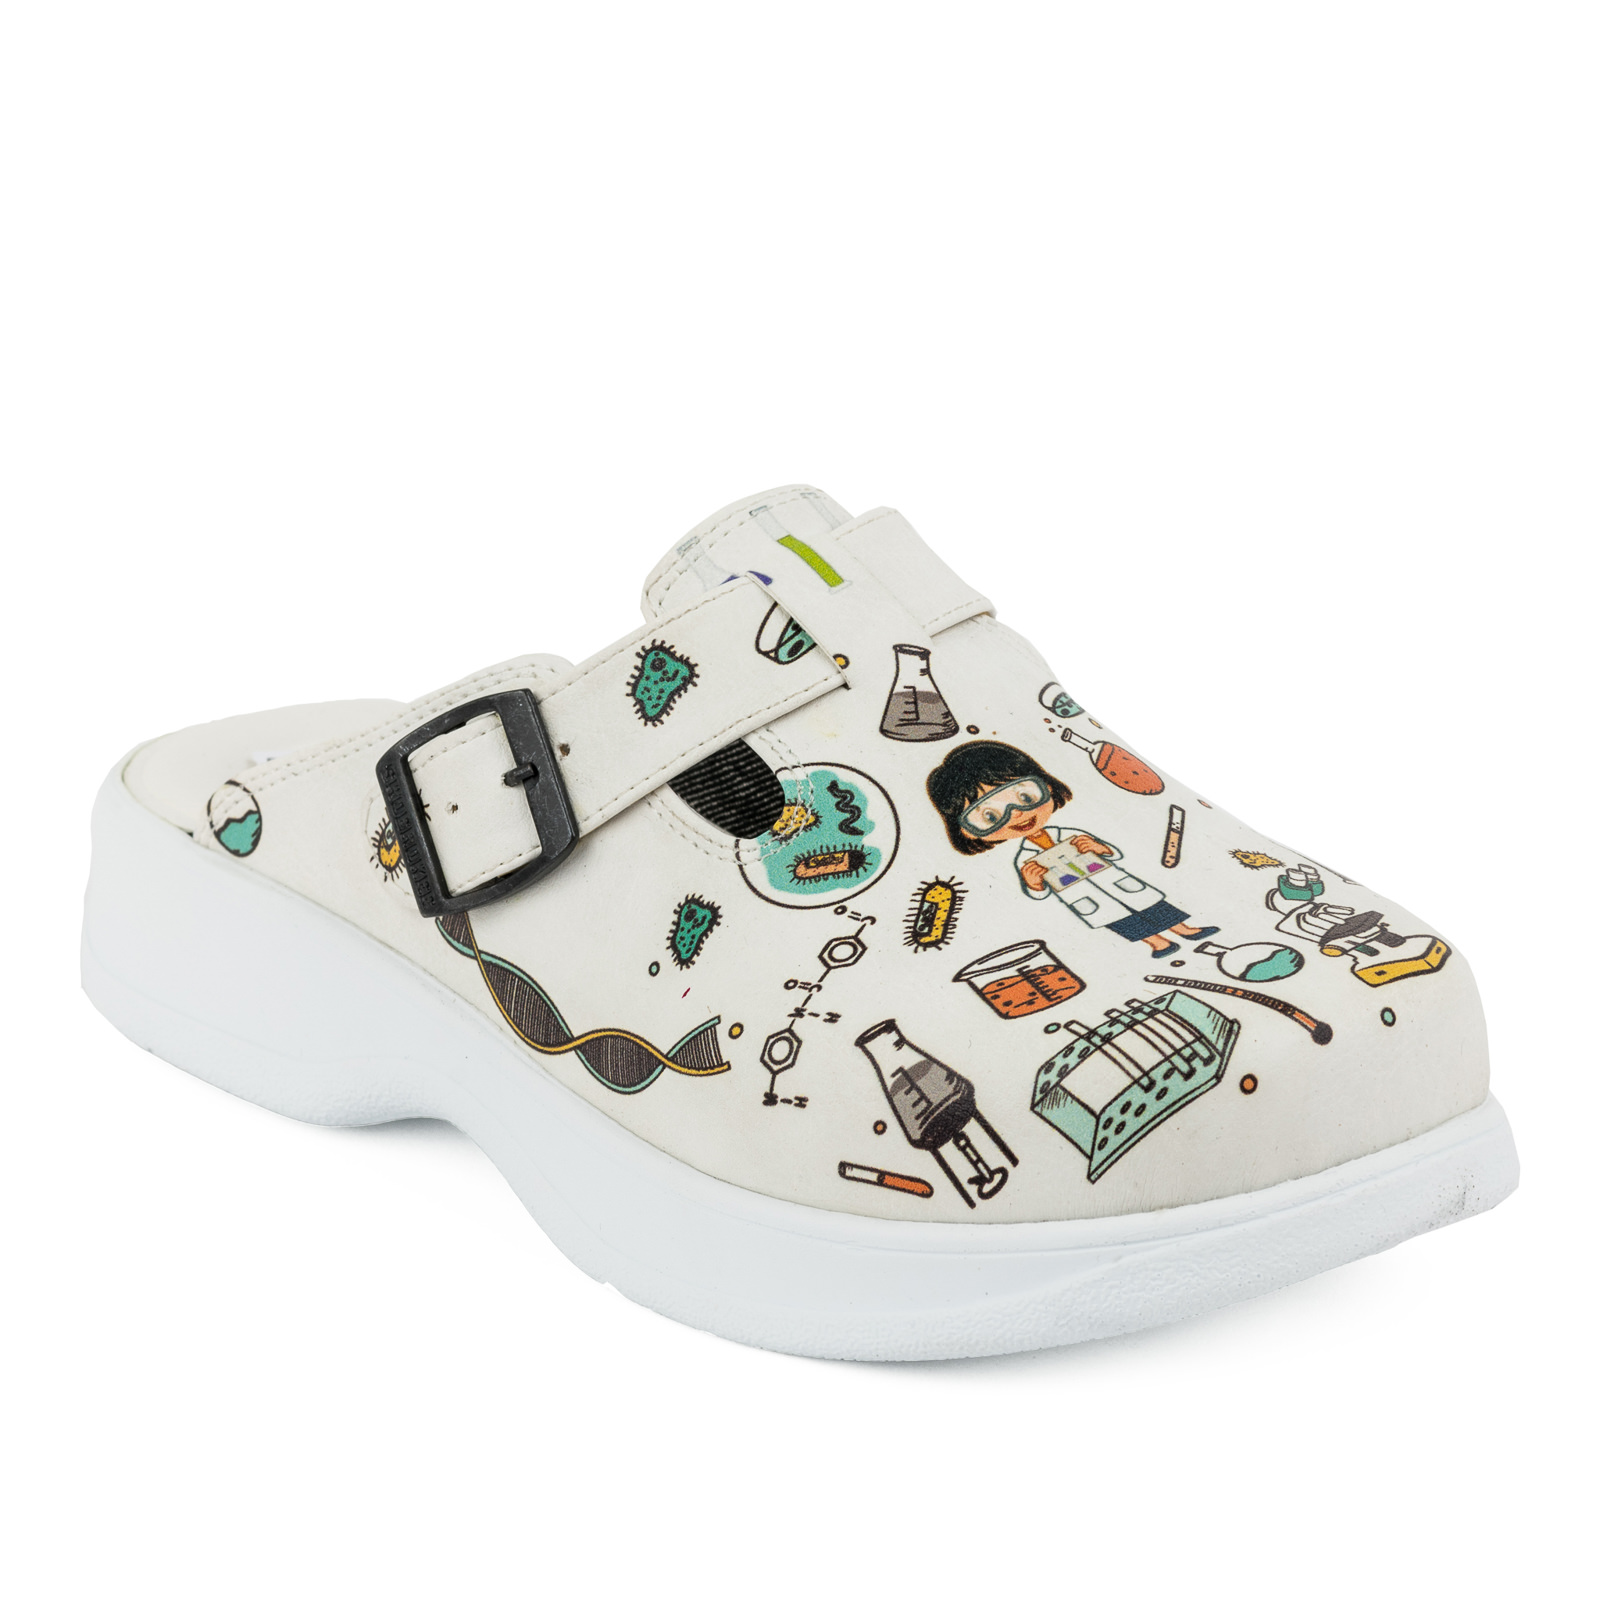 Patterned women clogs A097 - LAB - WHITE